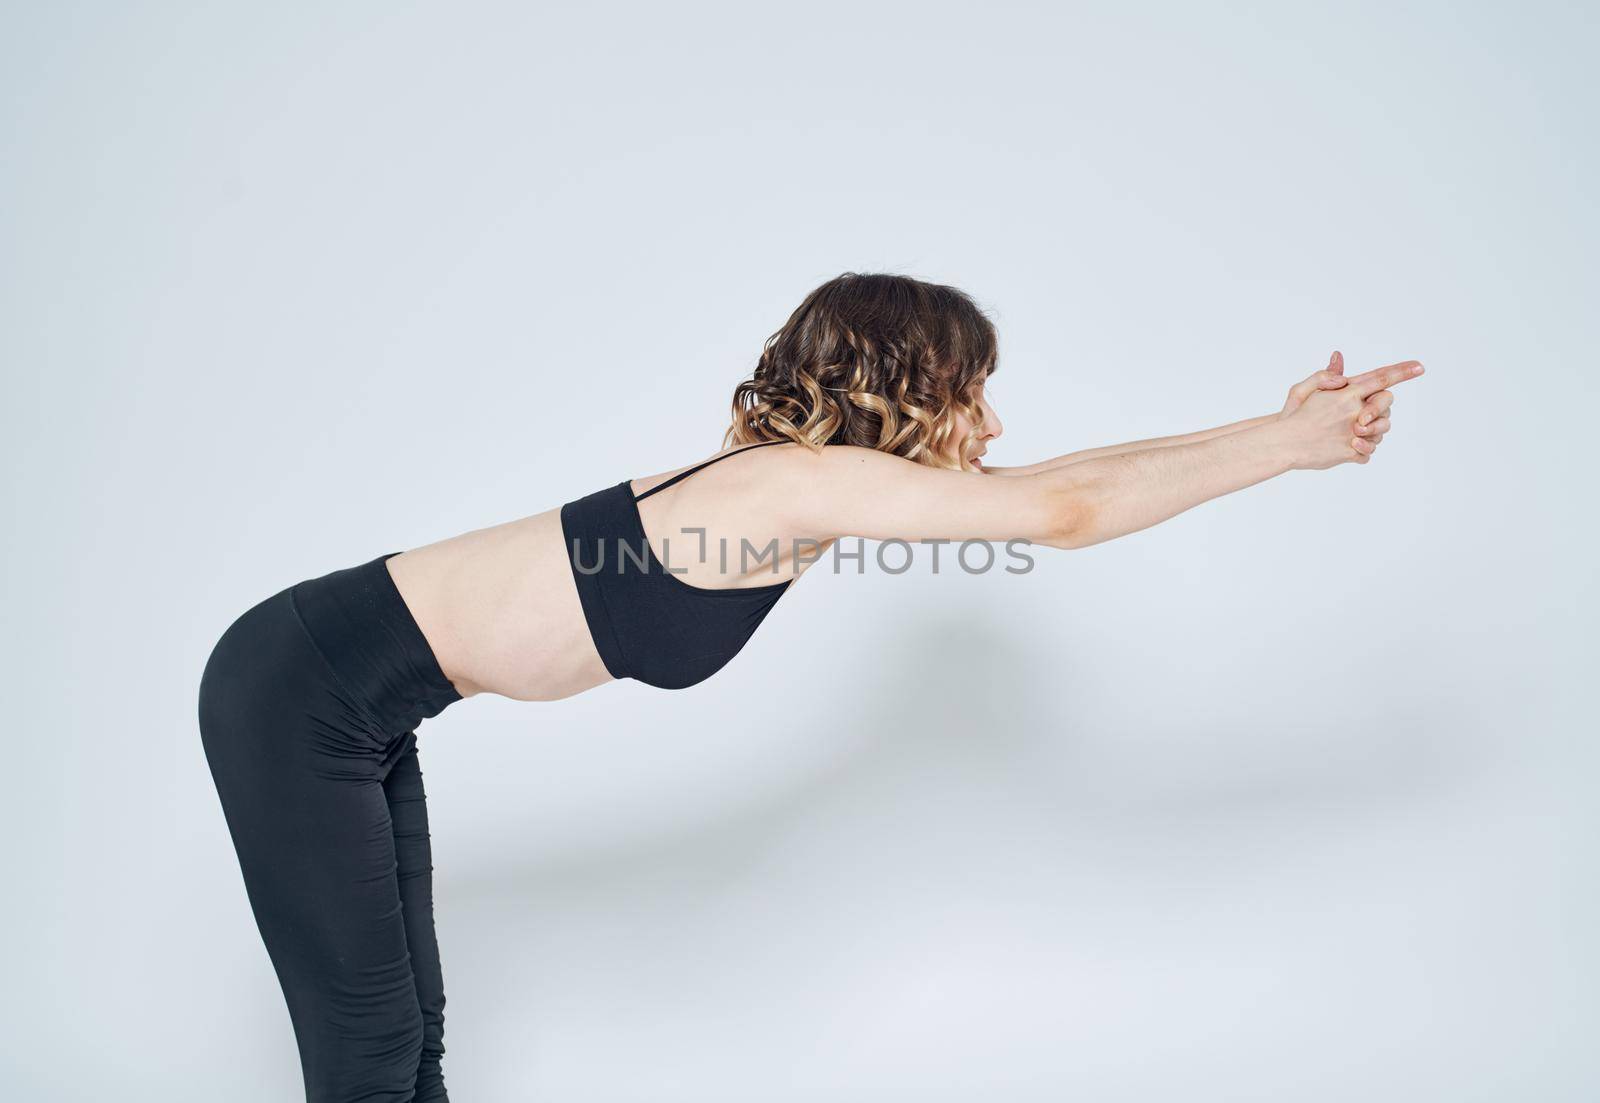 A sportive woman in leggings and a short T-shirt is gesturing with her hands on a light background by SHOTPRIME